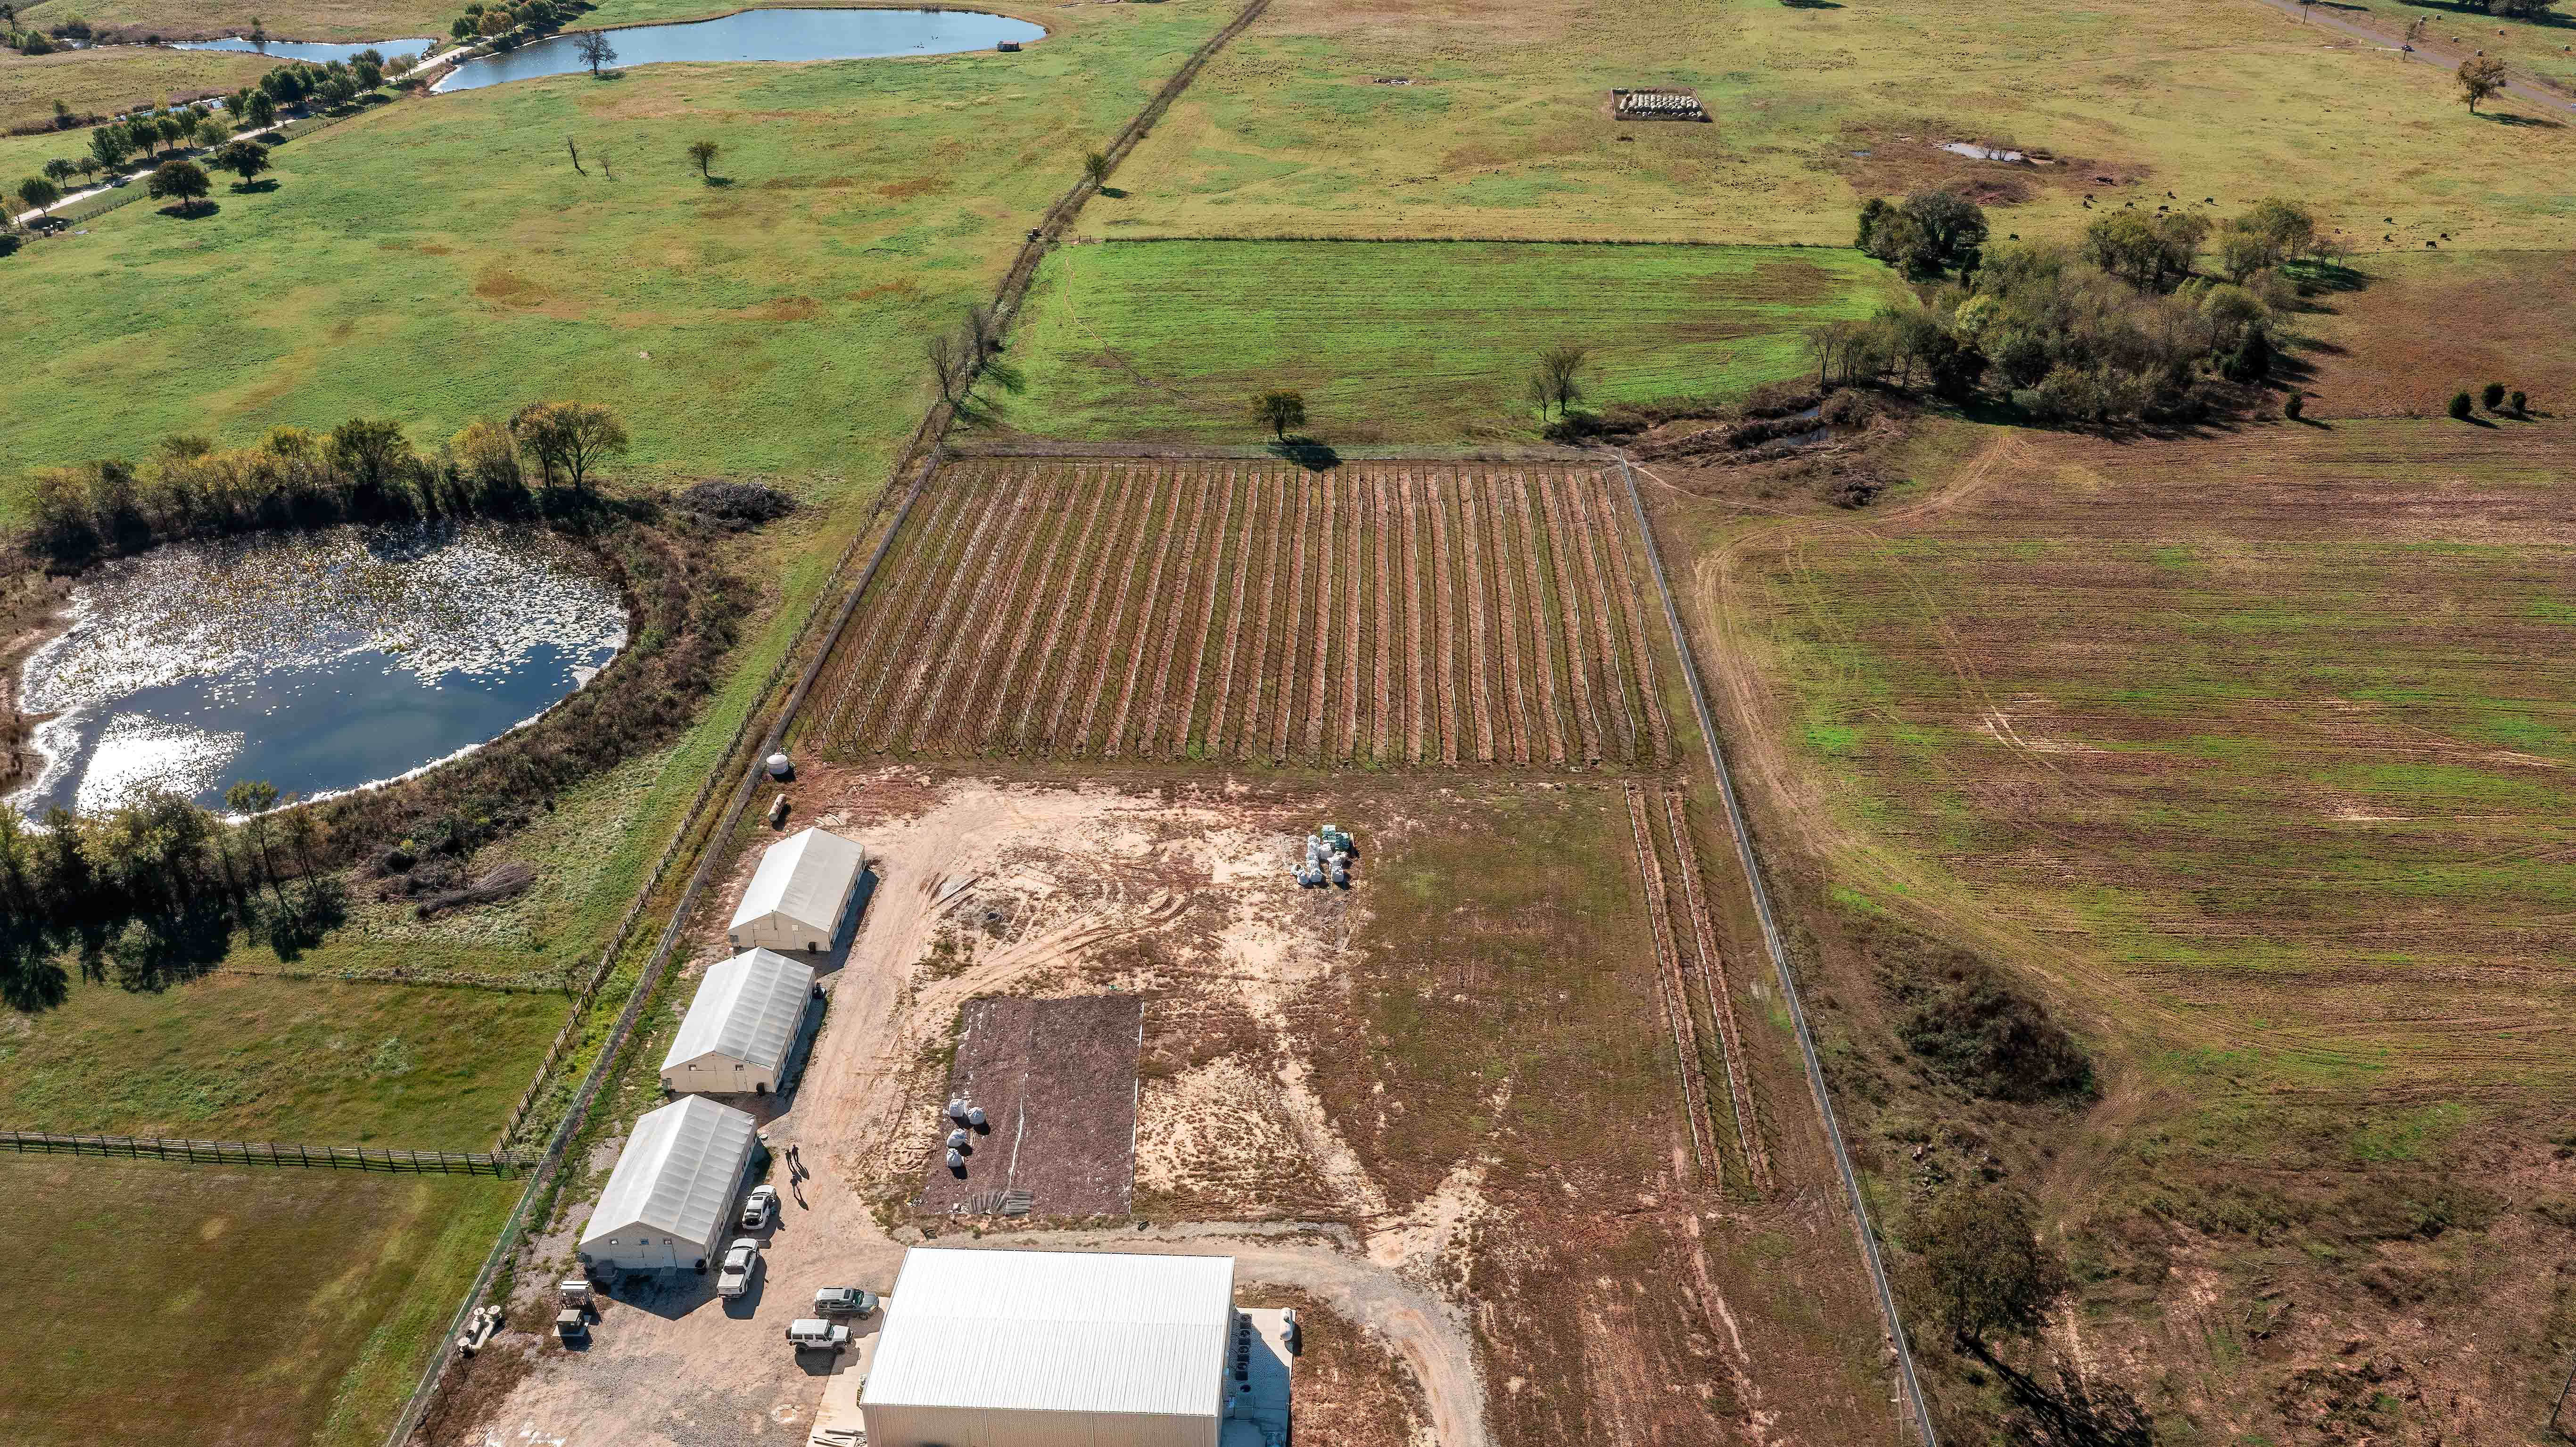 aerial view of legal cannibis grow operation in Oklahoma